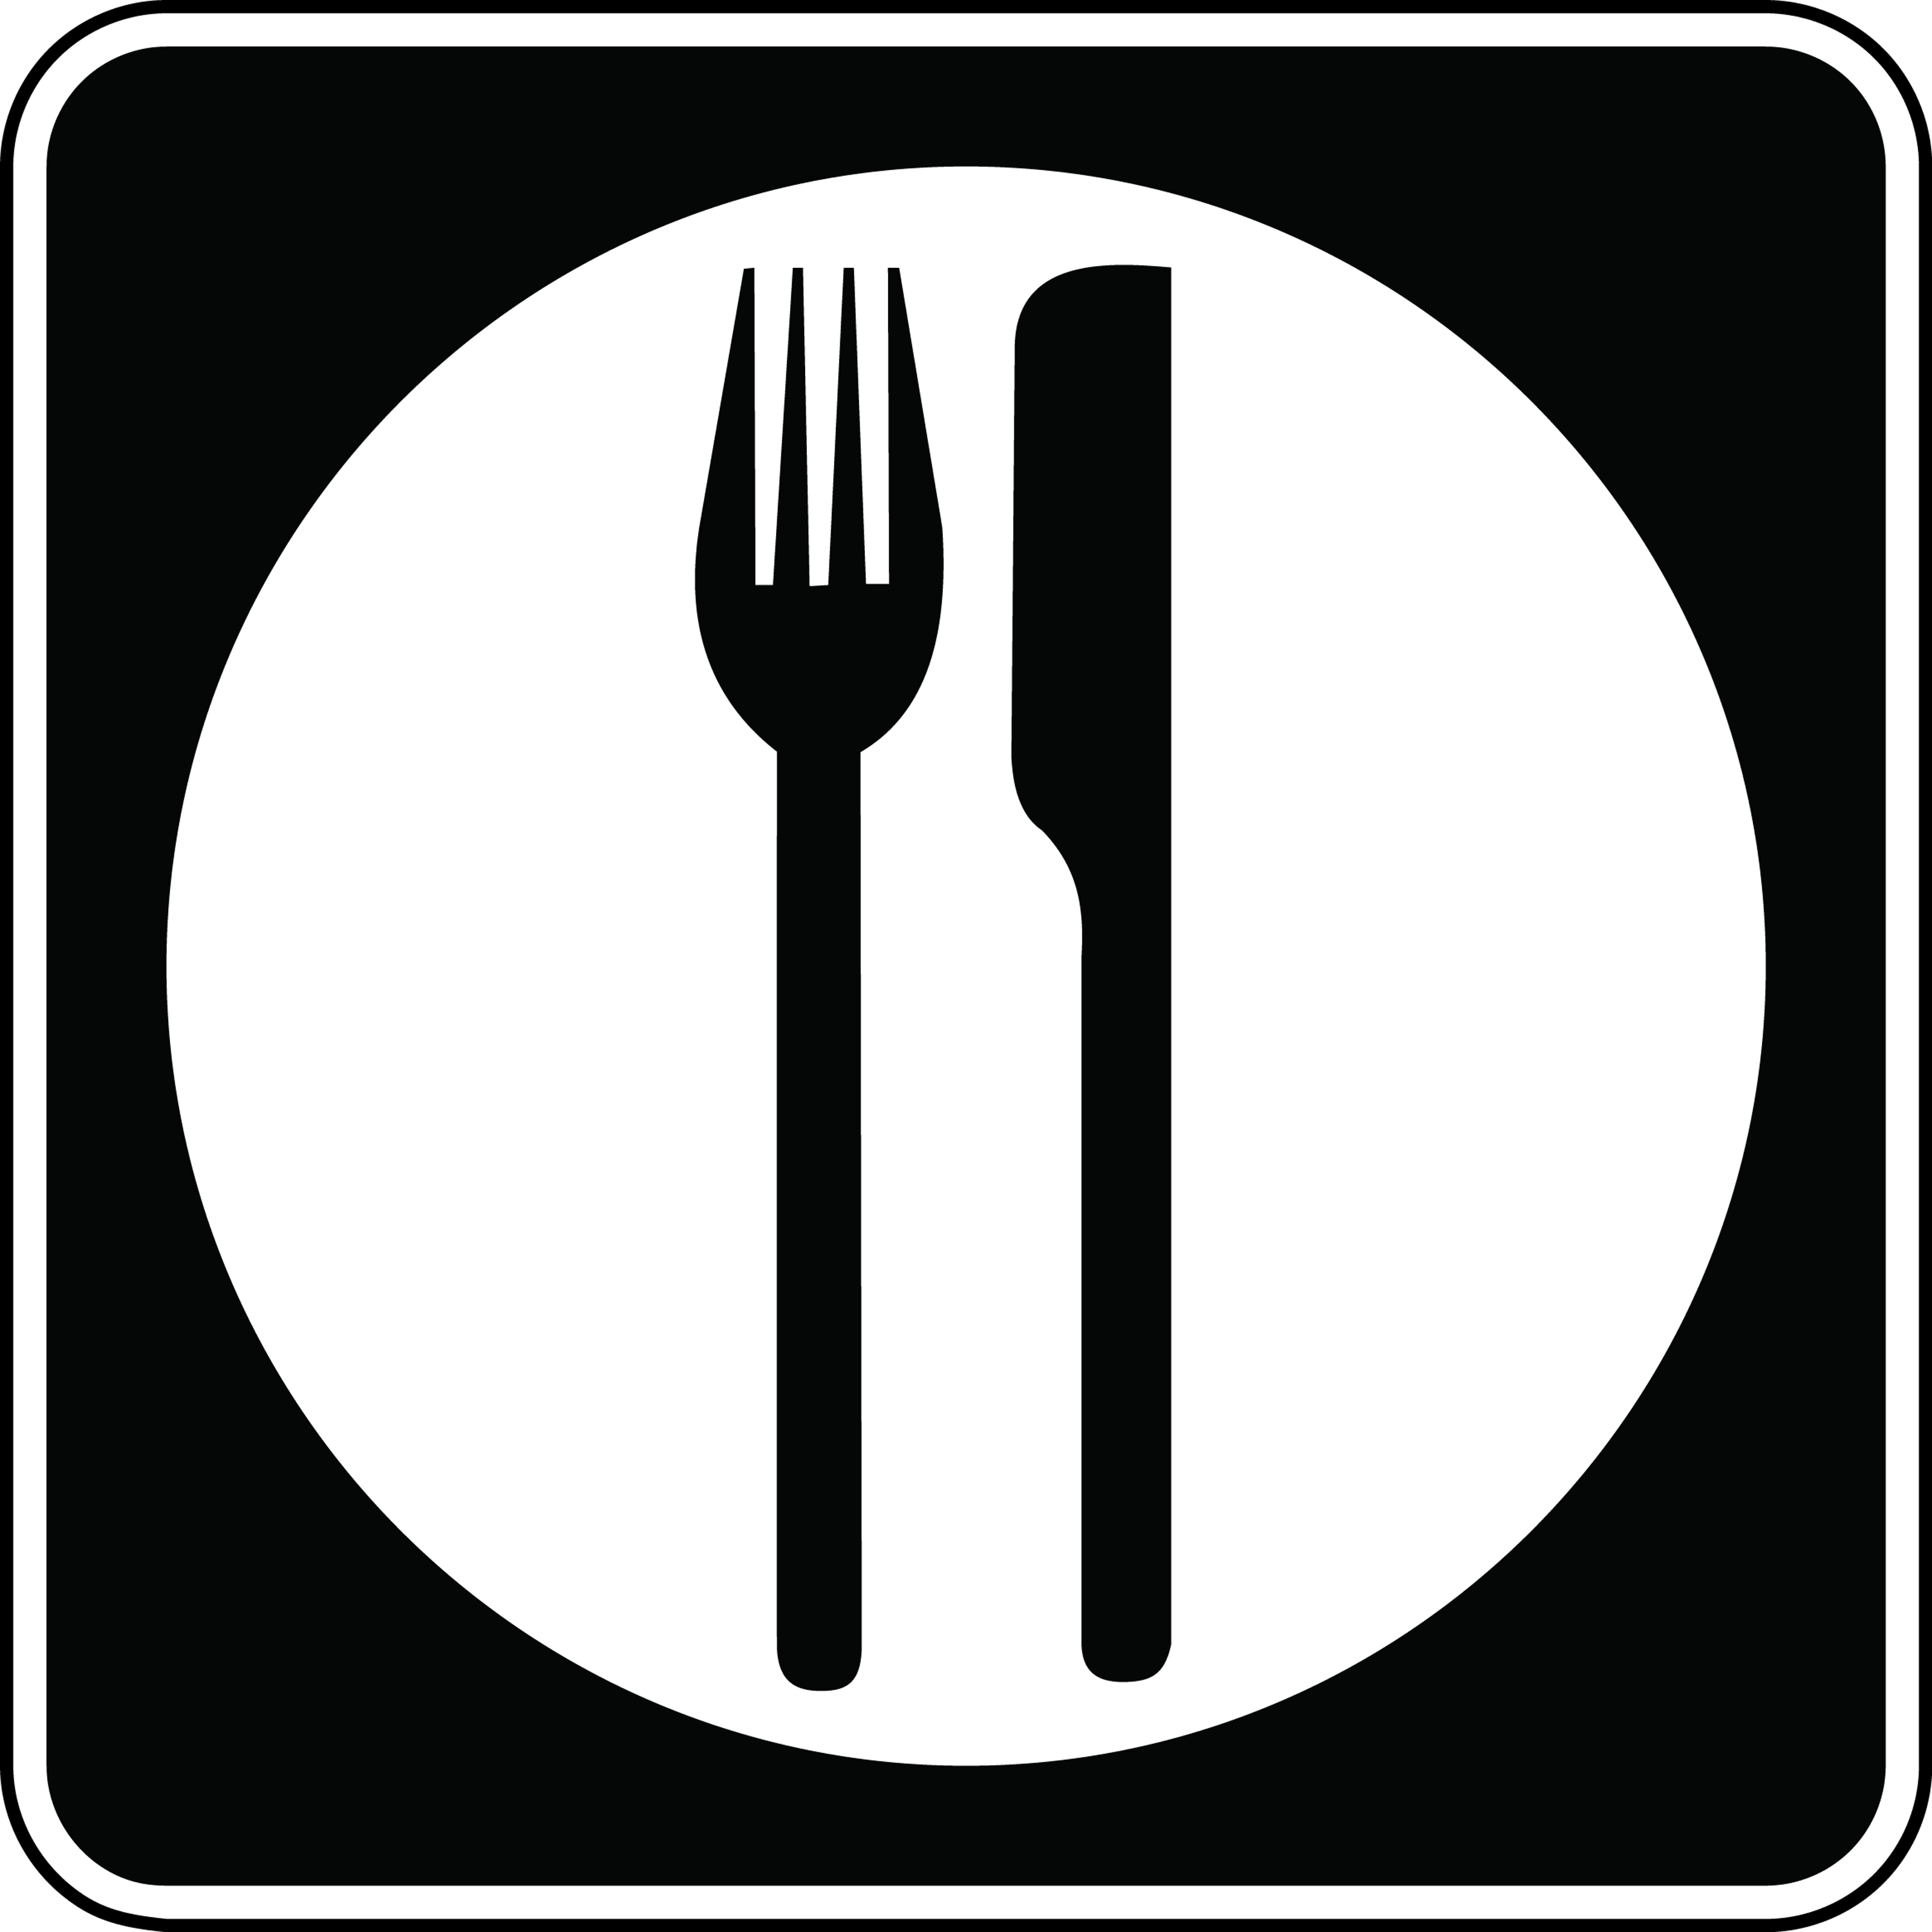 Food, Black and White | ClipArt ETC